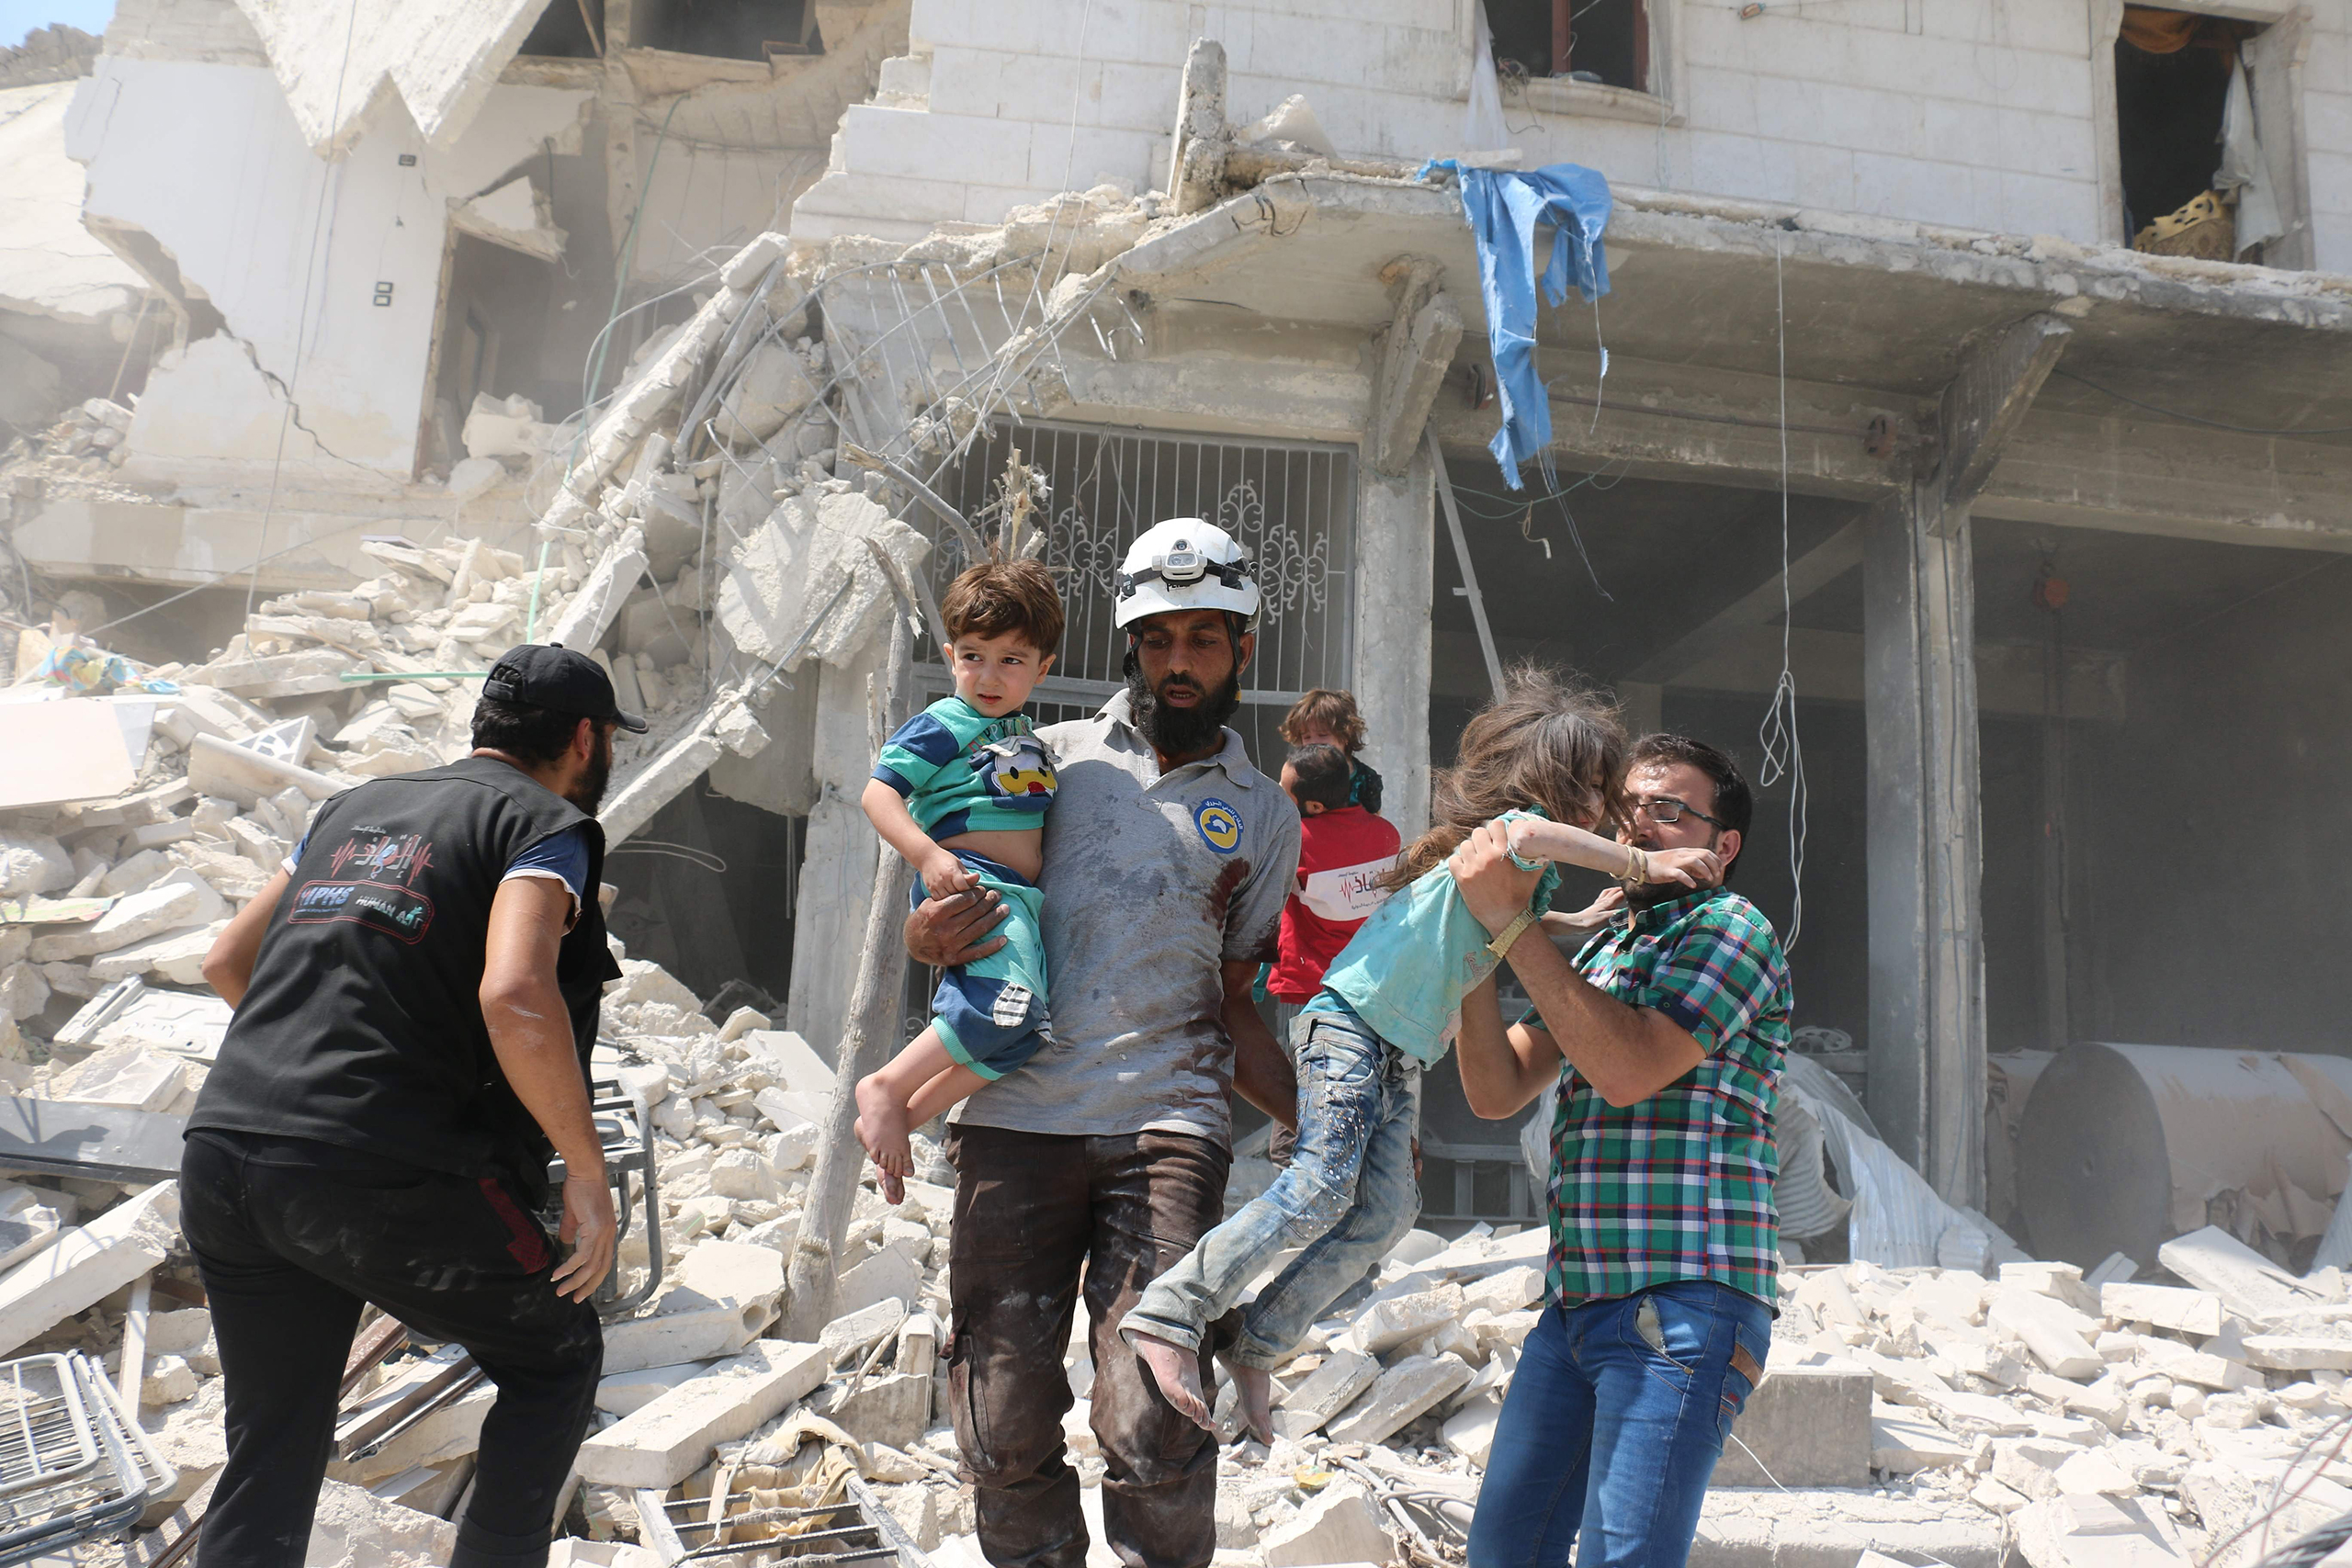 Syrian civilians and a rescue worker evacuate children in the Maadi district of eastern Aleppo after regime aircrafts reportedly dropped explosive-packed barrel bombs on Aug. 27, 2016. (Ameer Alhalbi—AFP/Getty Images)